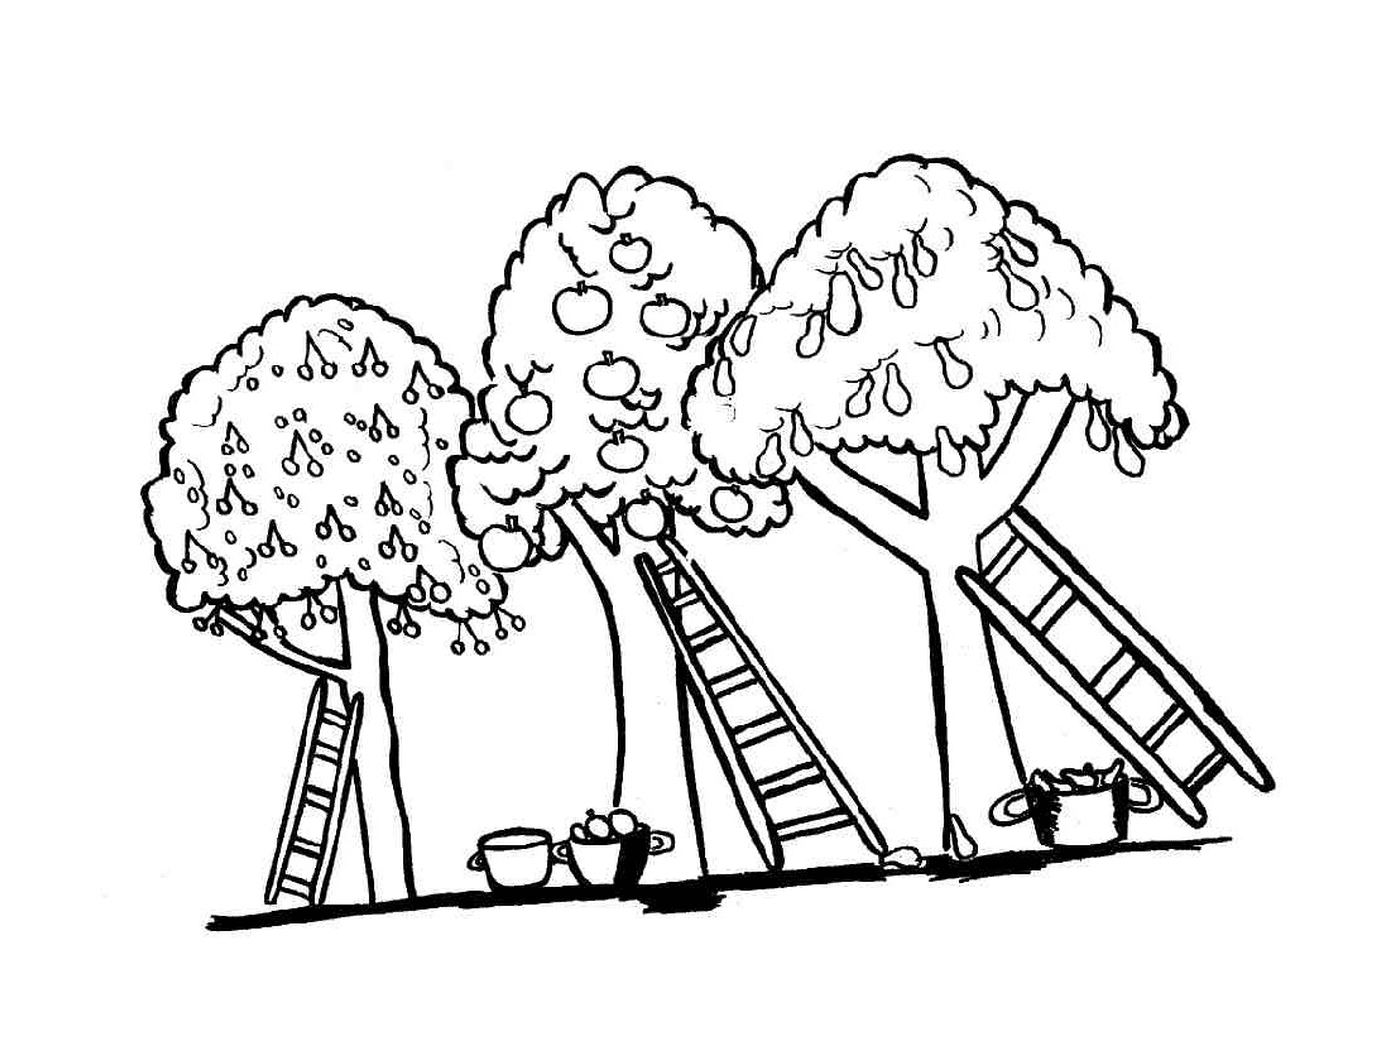  Trees and ladders 